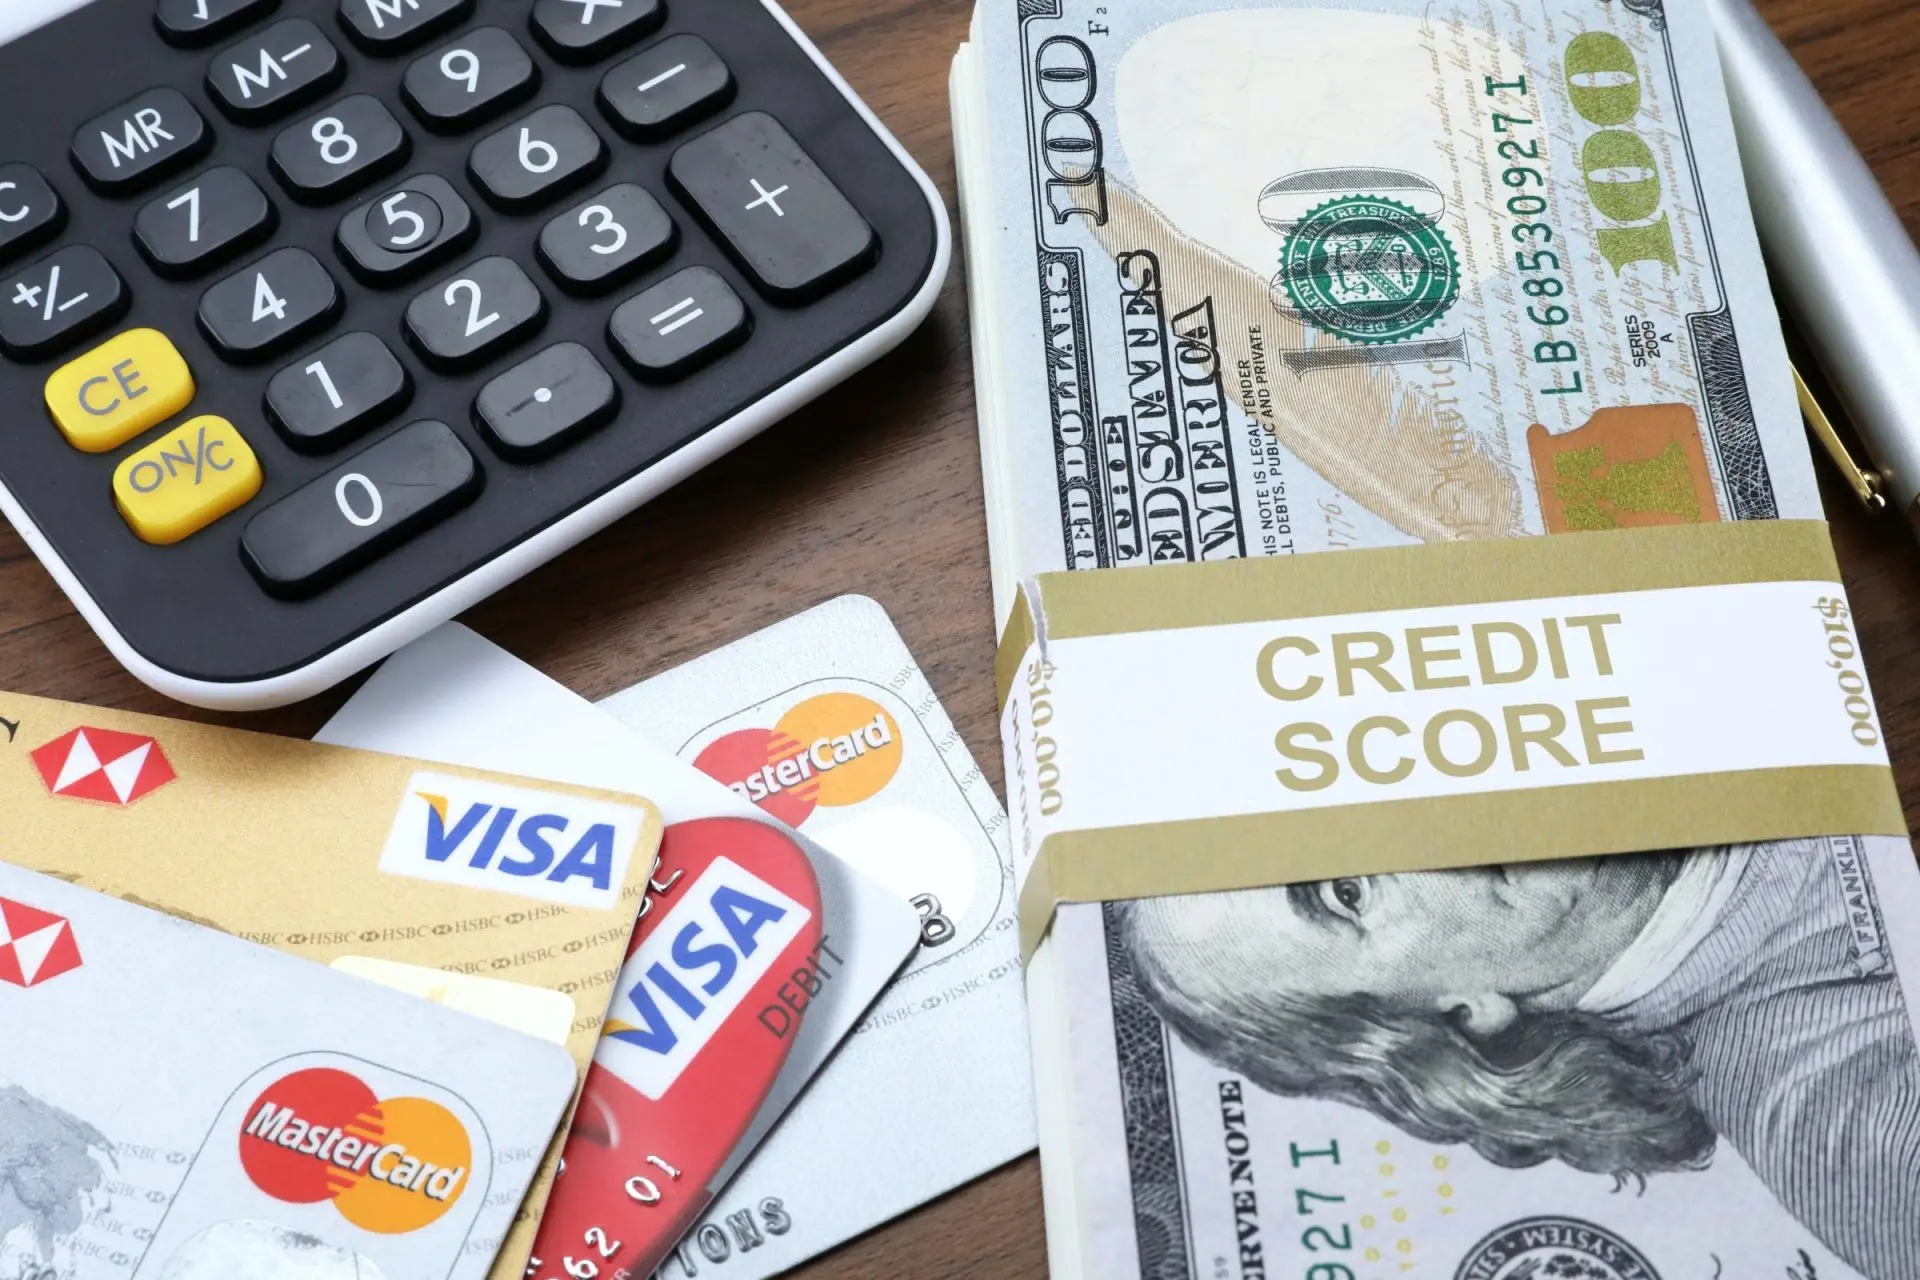 National Credit Adjusters – Key Strategies to remove from credit report